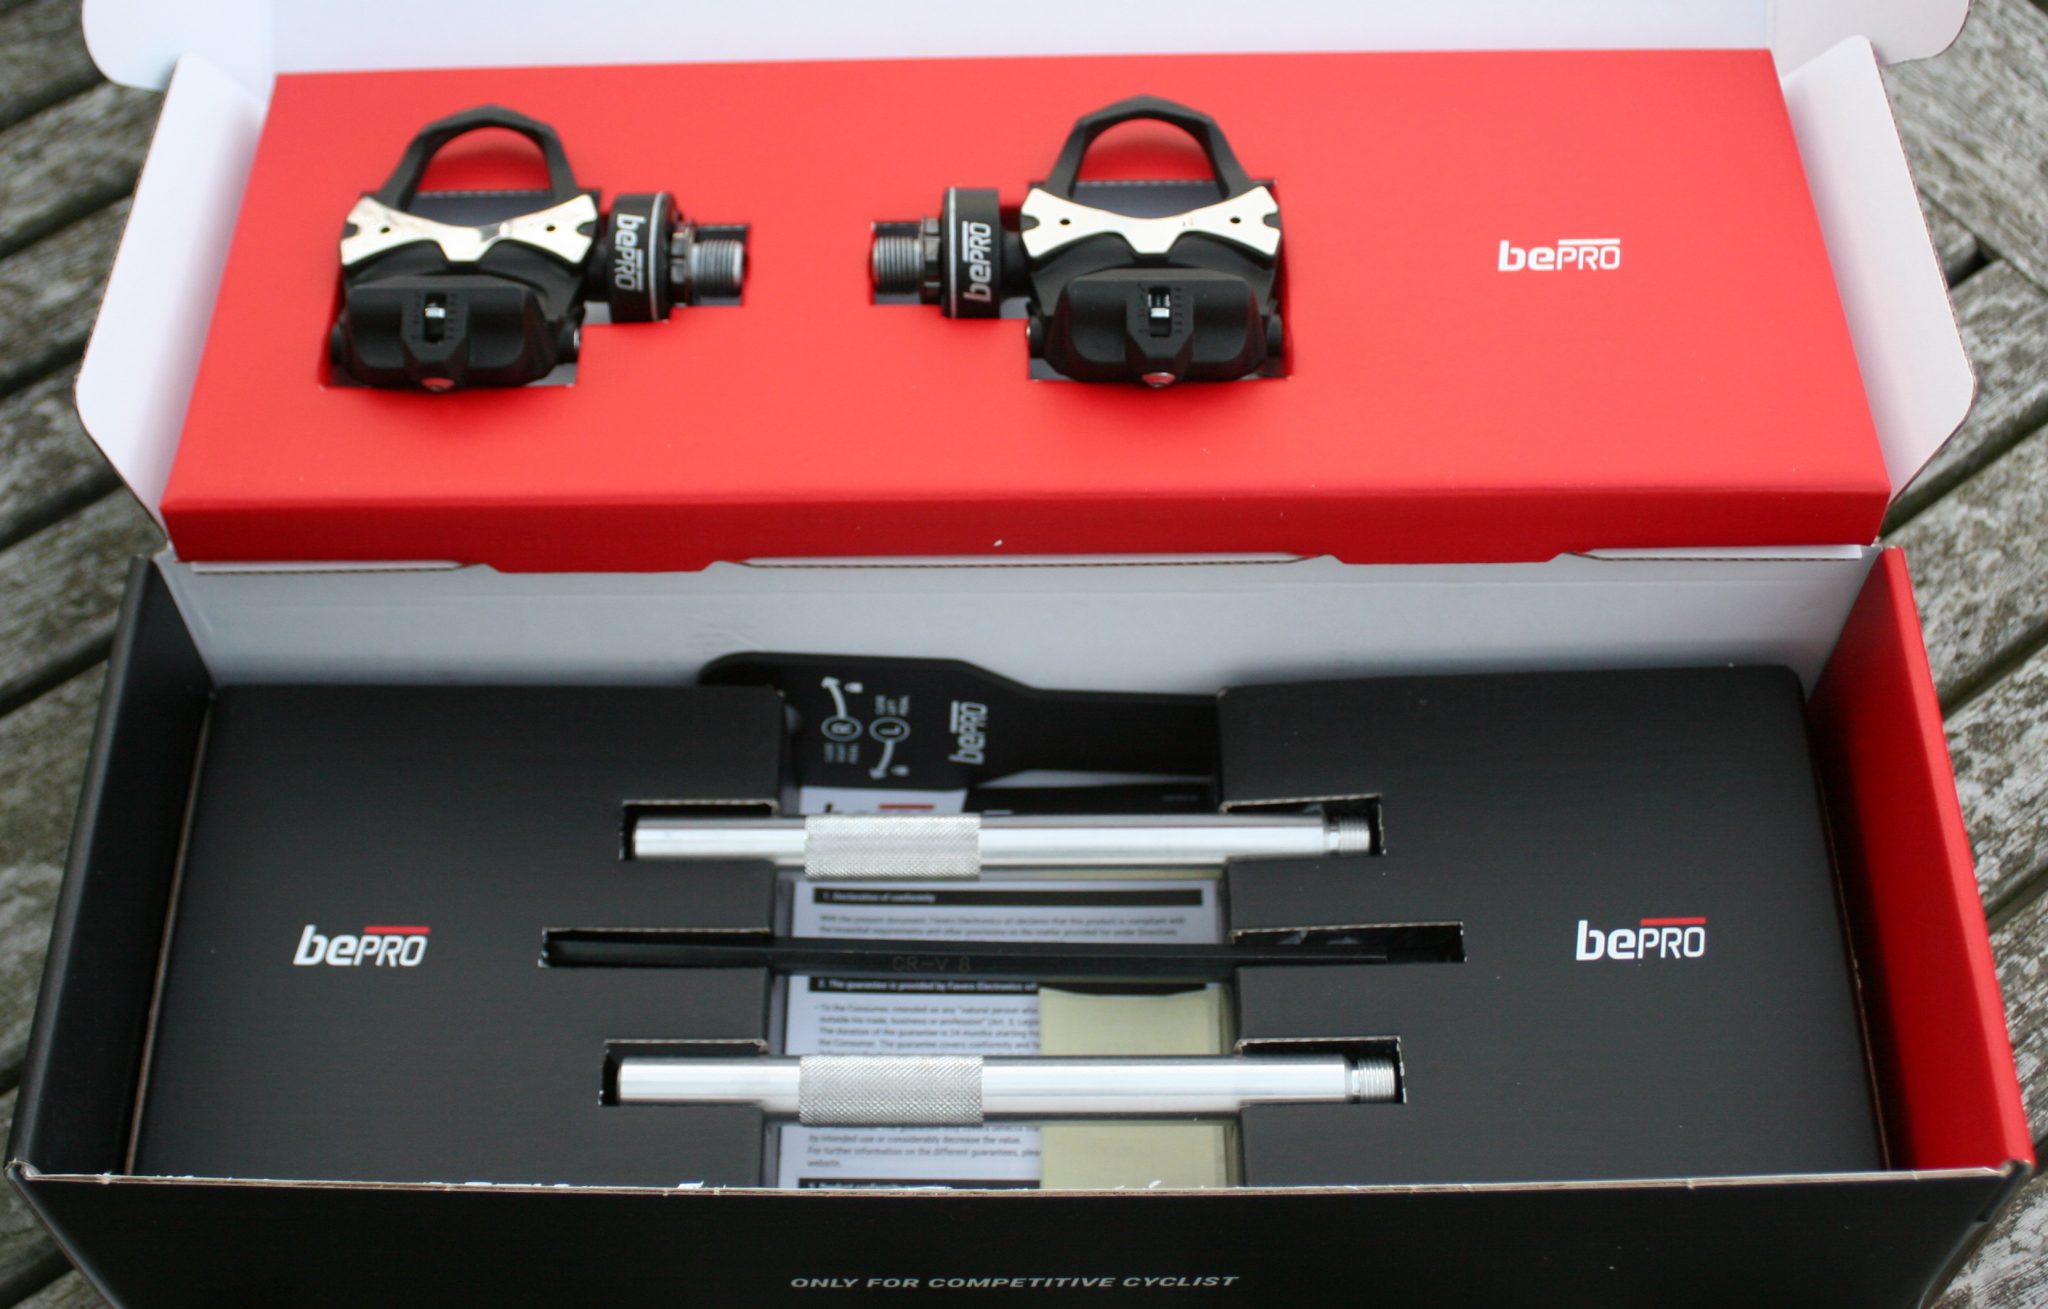 Favero bePRO Pedals - Power Meter Review Unboxing